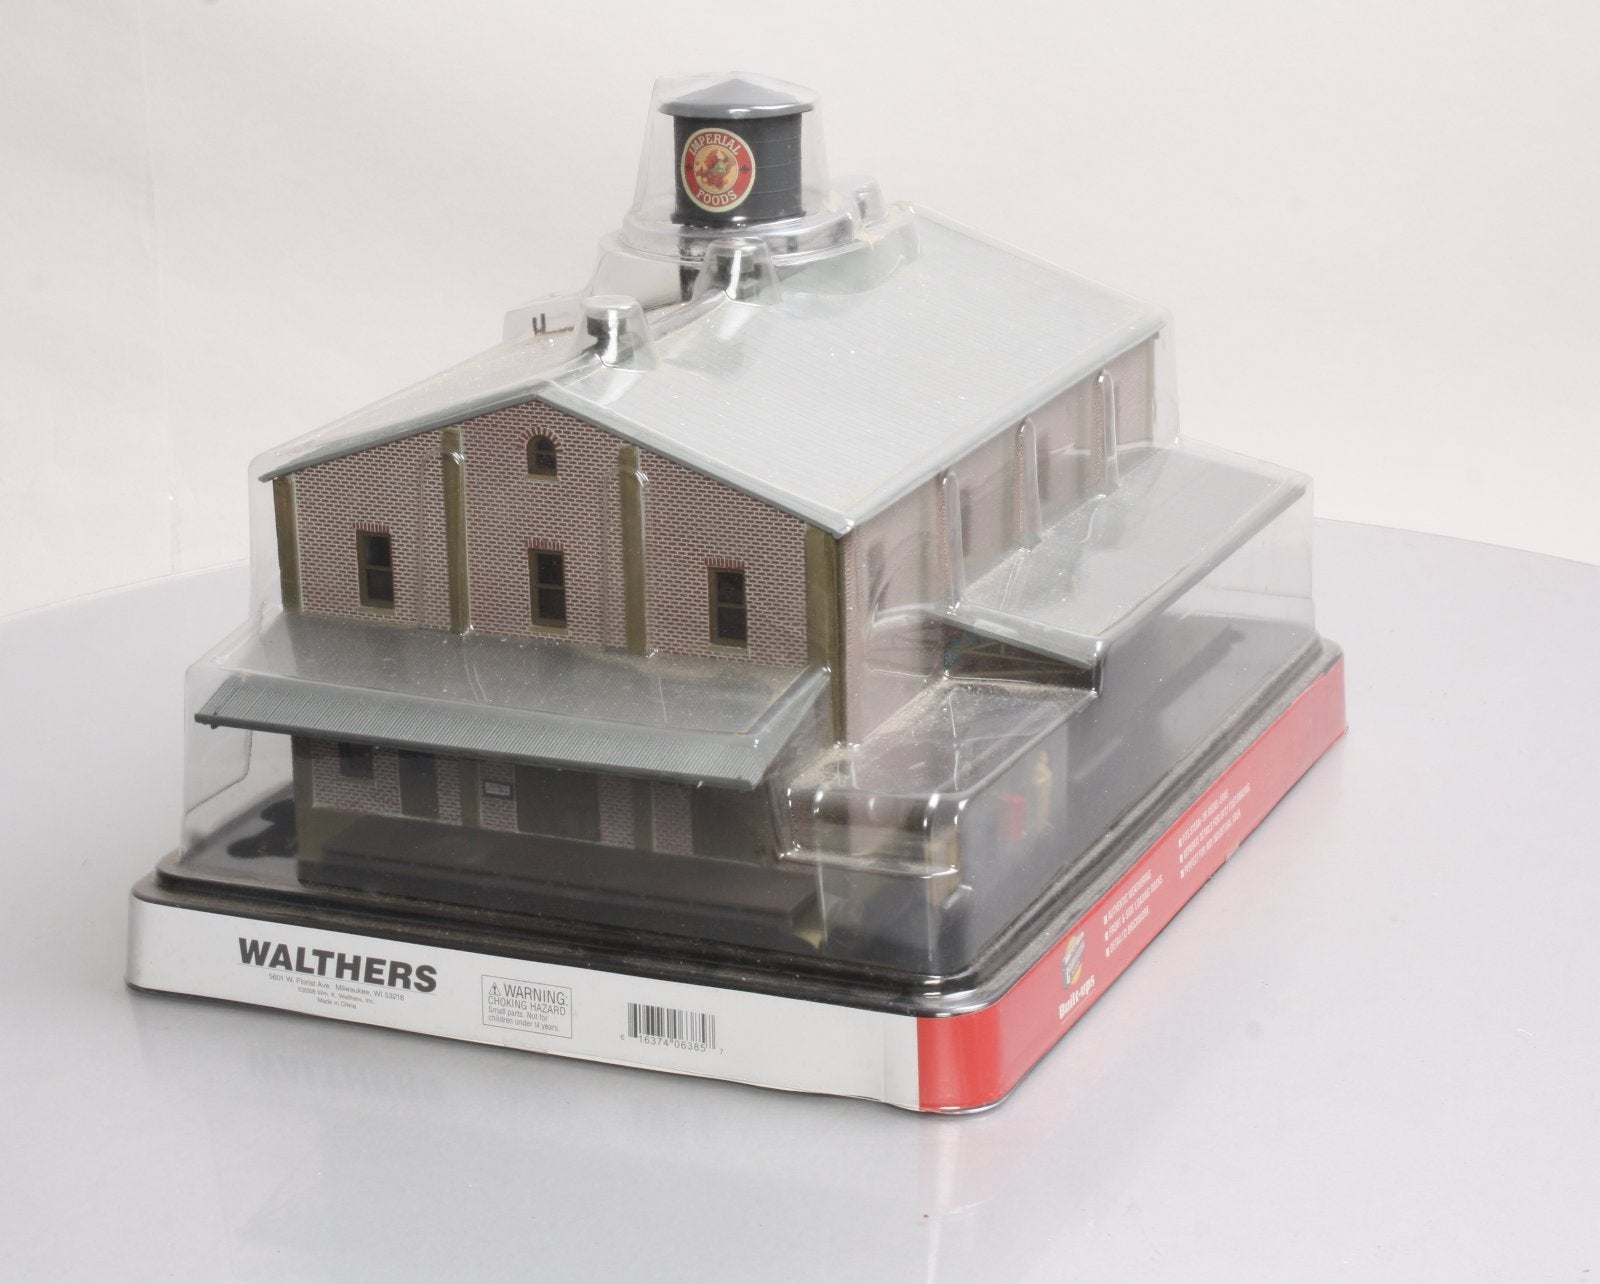 Walthers 2852 HO Scale Built-Up Imperial Foods